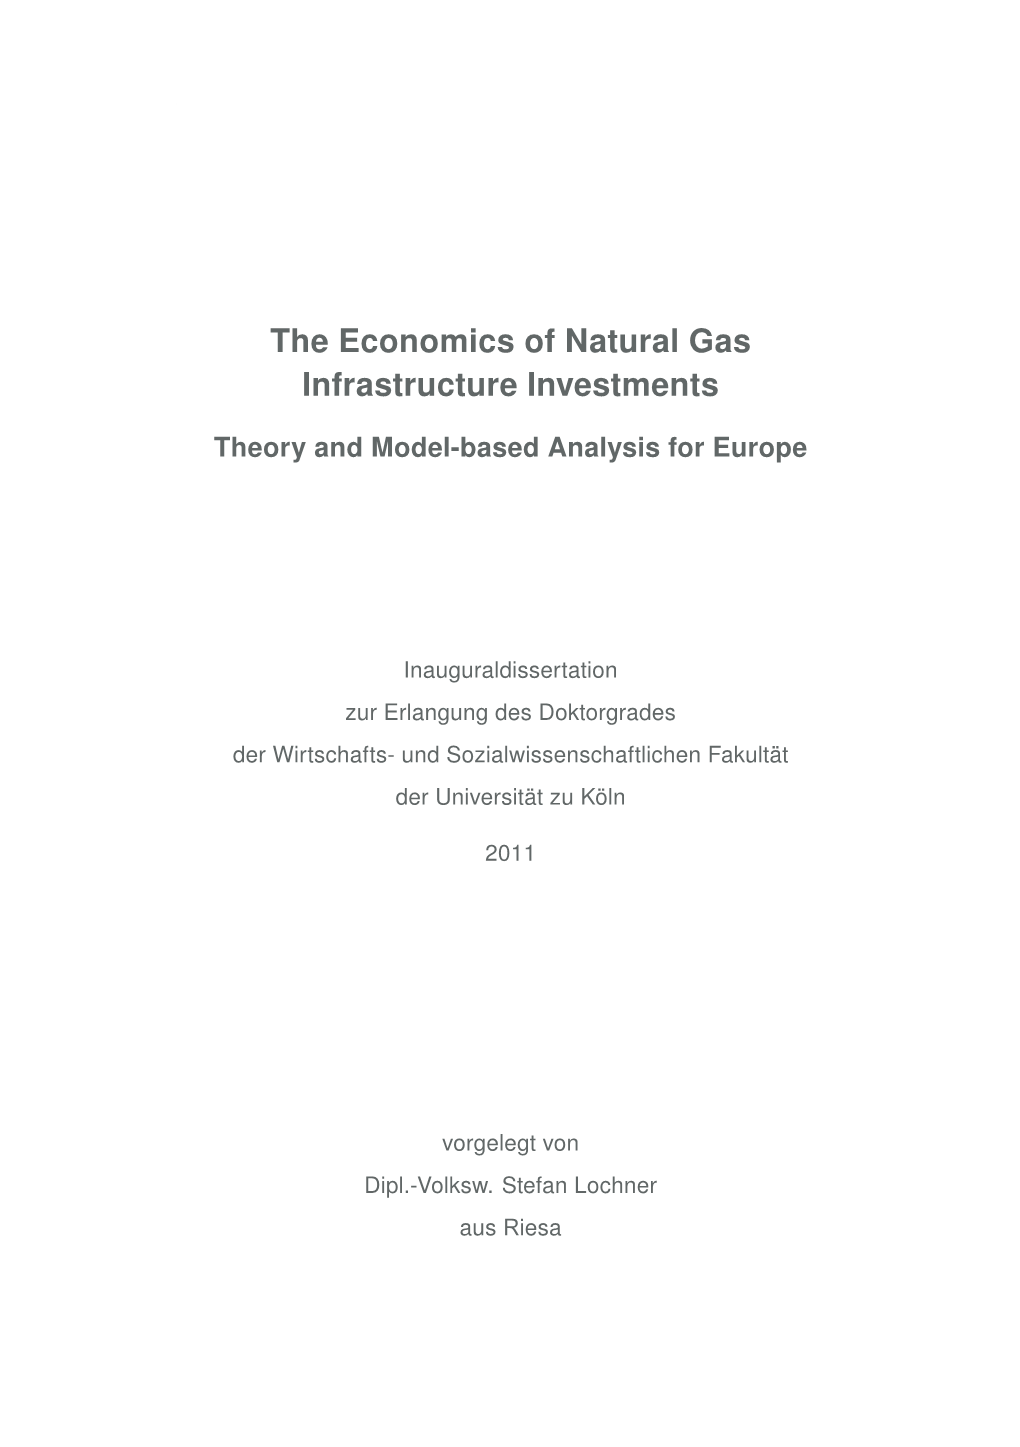 The Economics of Natural Gas Infrastructure Investments